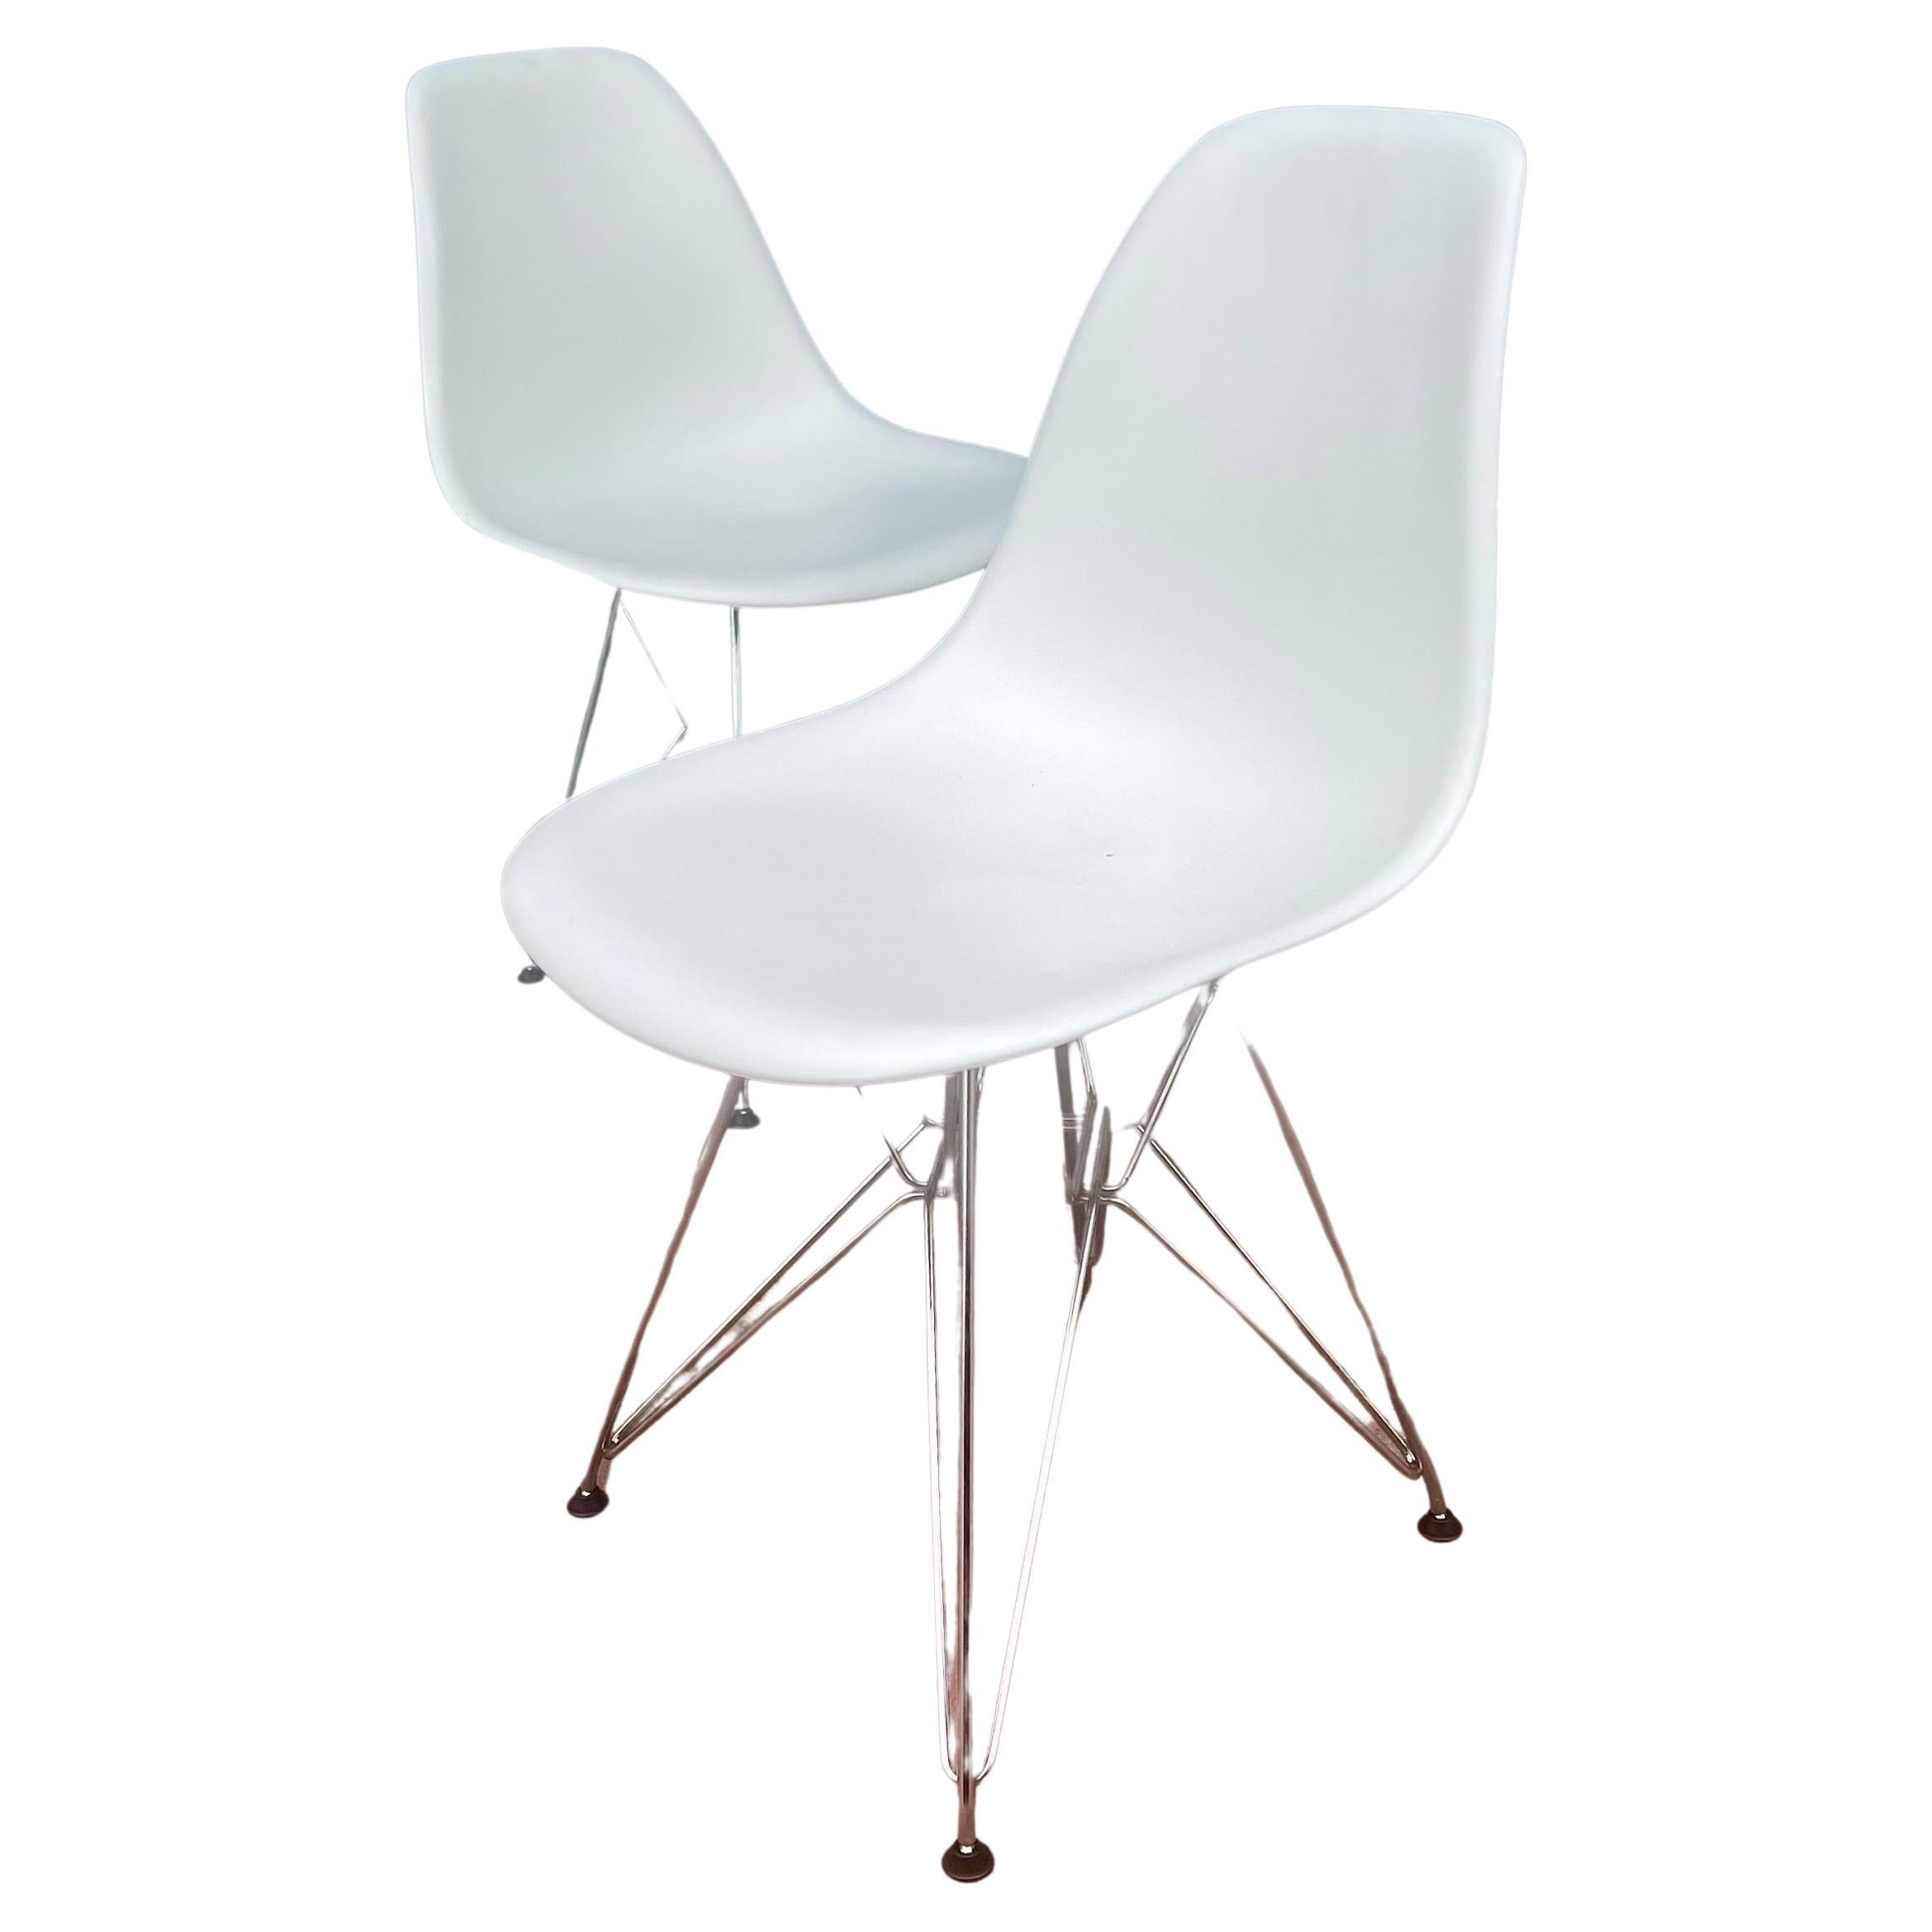 American Iconic Molded Plastic Chairs Designed by Charles Eames for Herman Miller 3 Avail